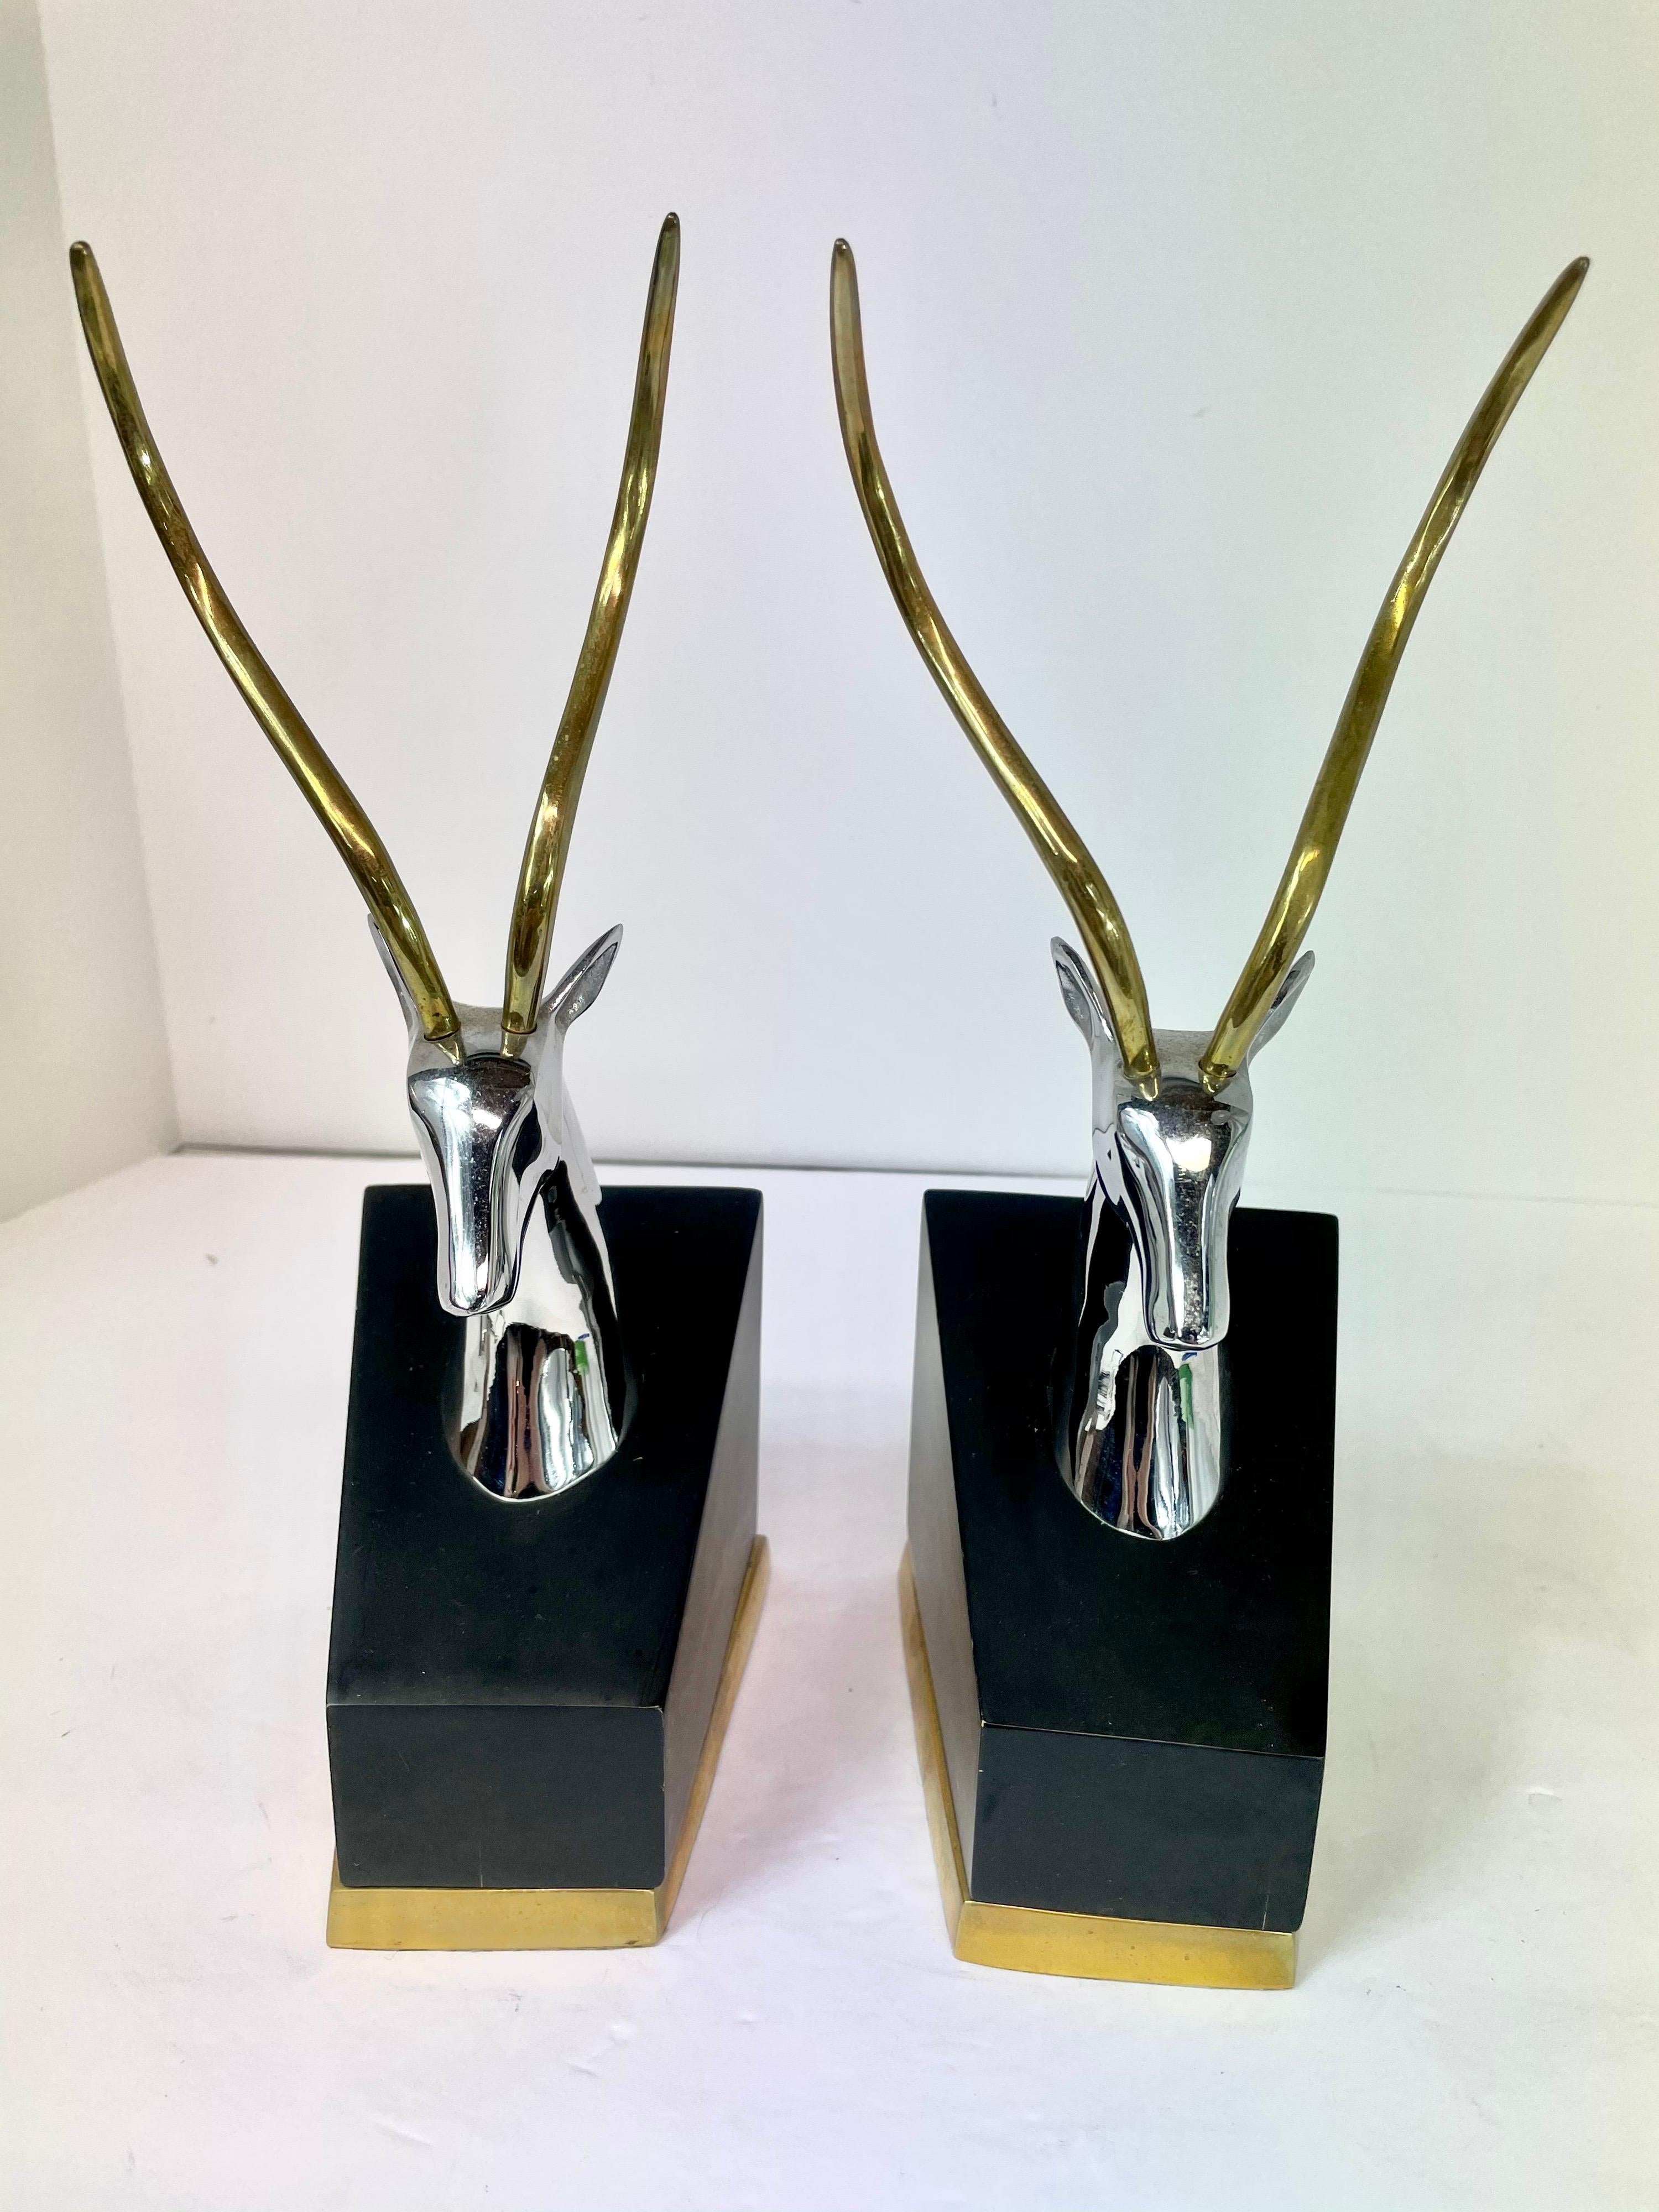 Pair of impala bookends in polished brass and chrome on wood bases banded in brass. Nice large size. Looks great on the bookshelf! Brass and chrome are both in very good condition. Measurement is for each book end.